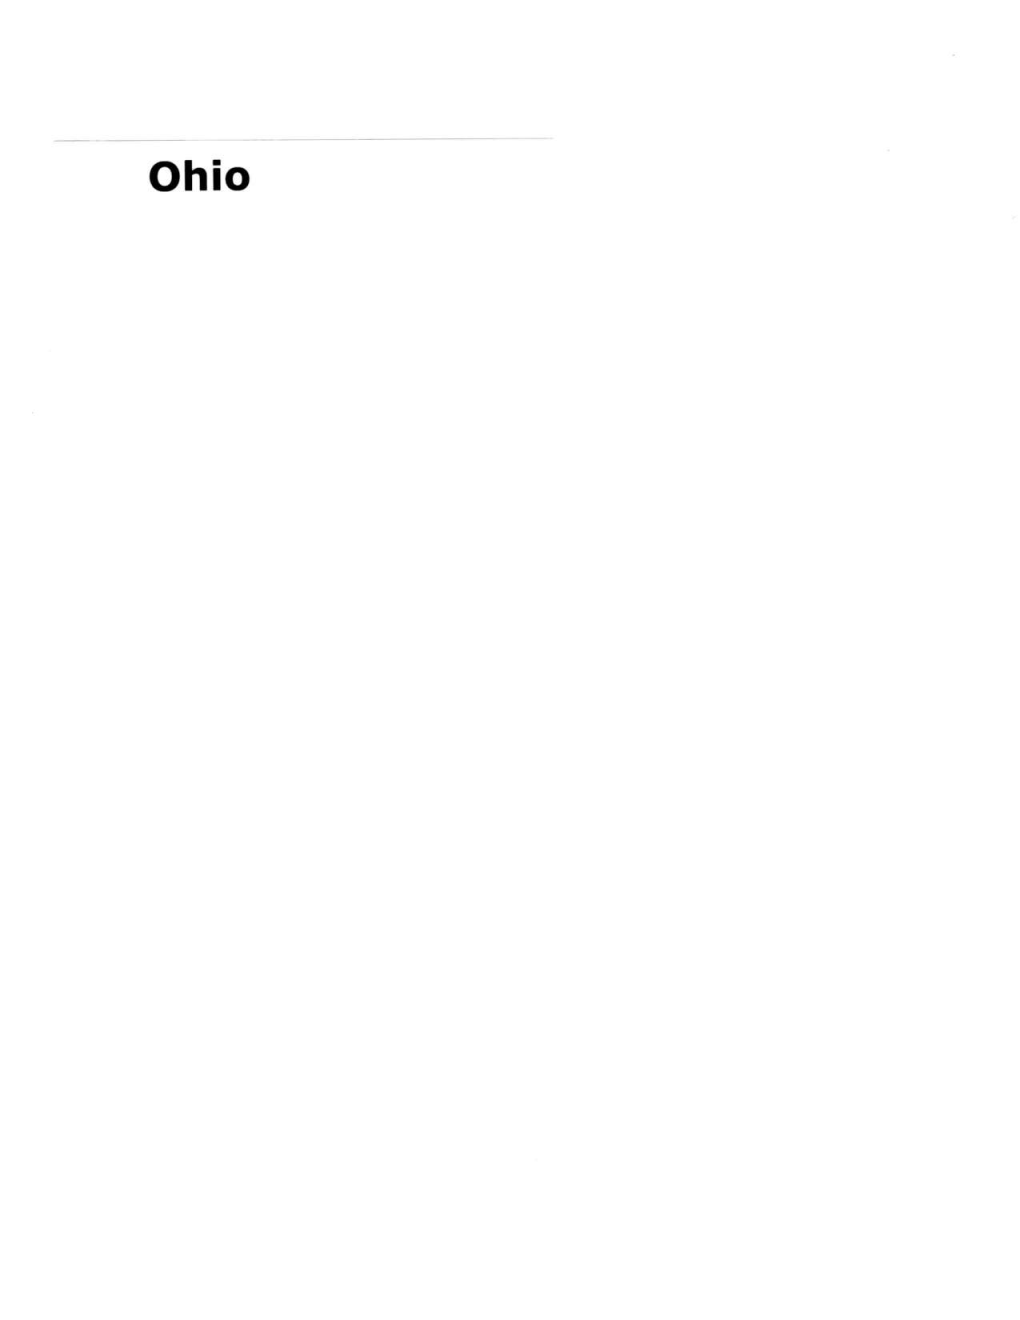 Collection Text: Ohio-Wisconsin